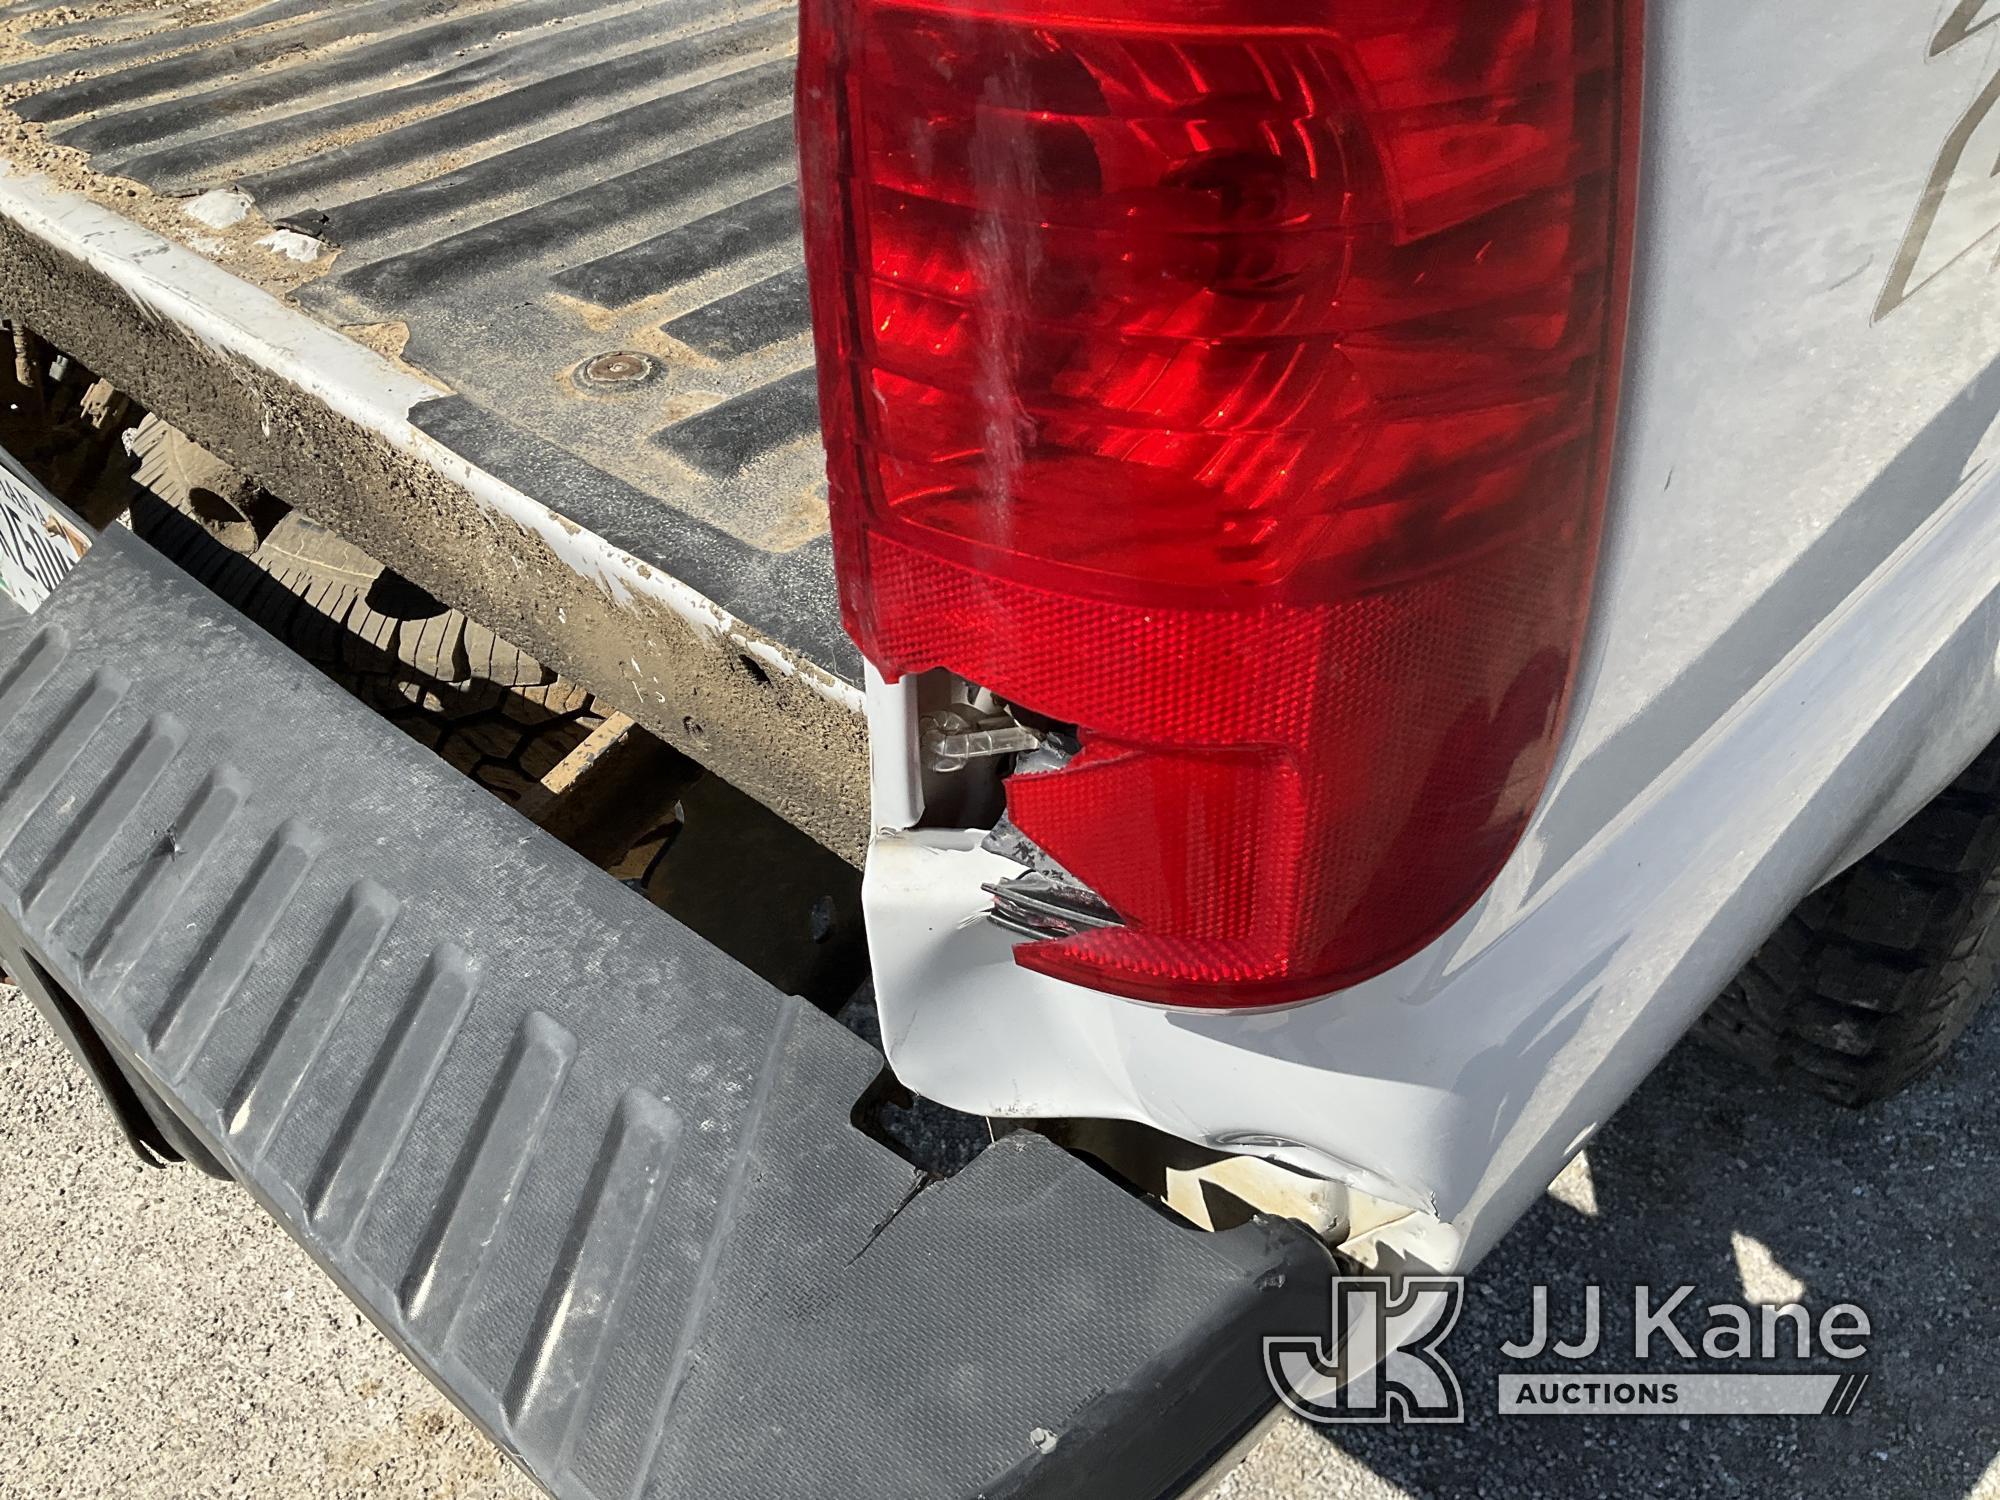 (Hawk Point, MO) 2016 Ford F250 4x4 Extended-Cab Pickup Truck Non Running, Power To Dash, Cranks Wil